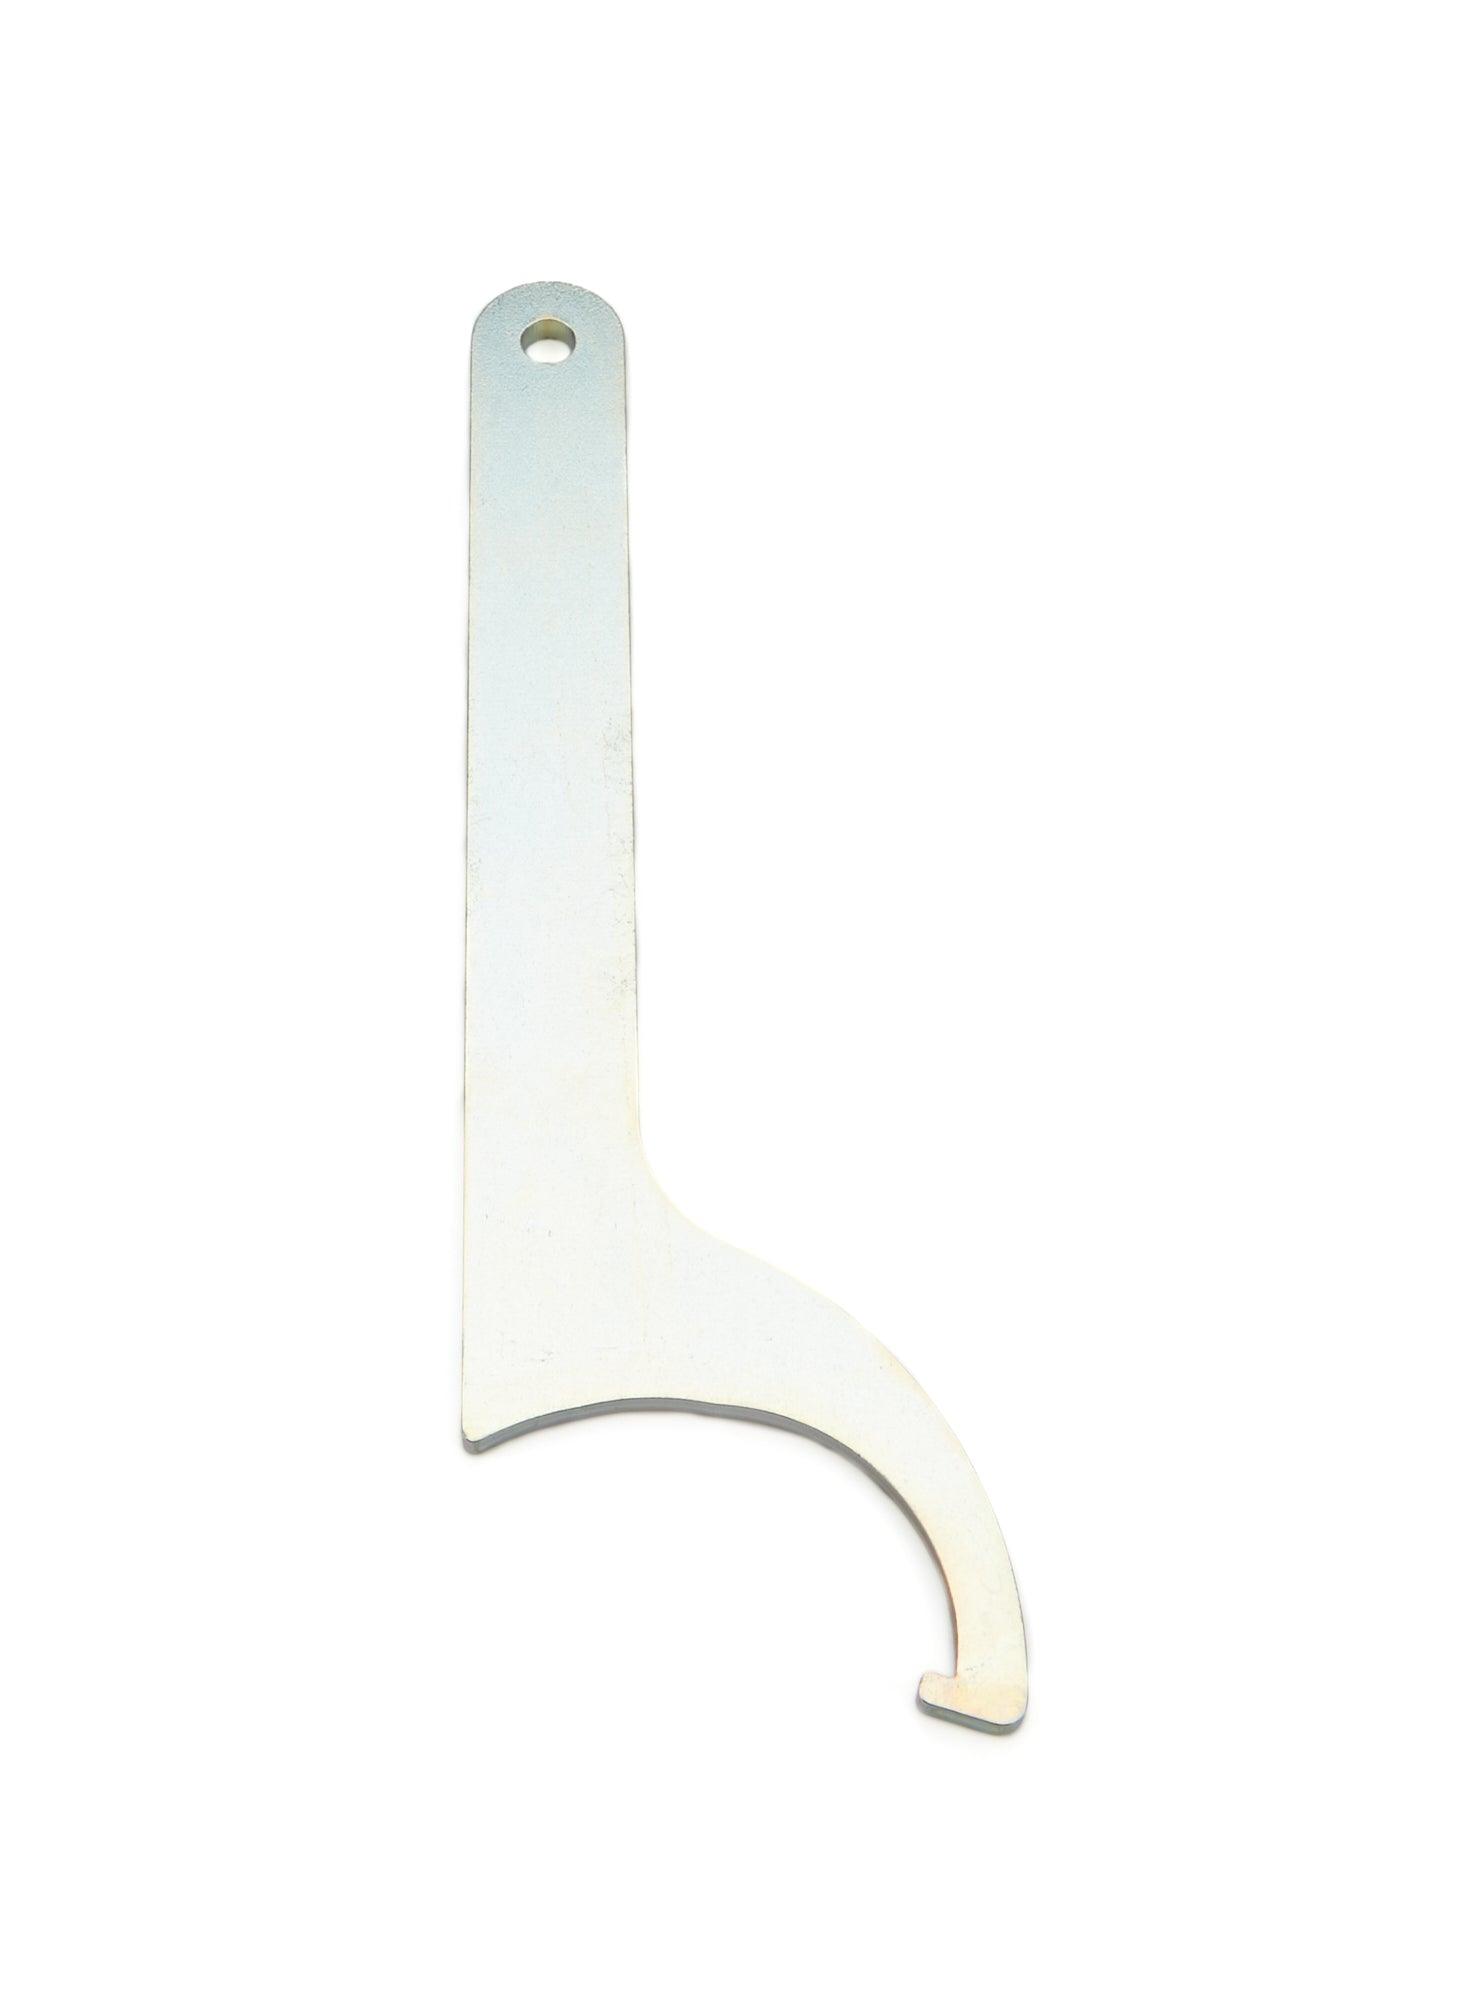 Spanner Wrench - Burlile Performance Products